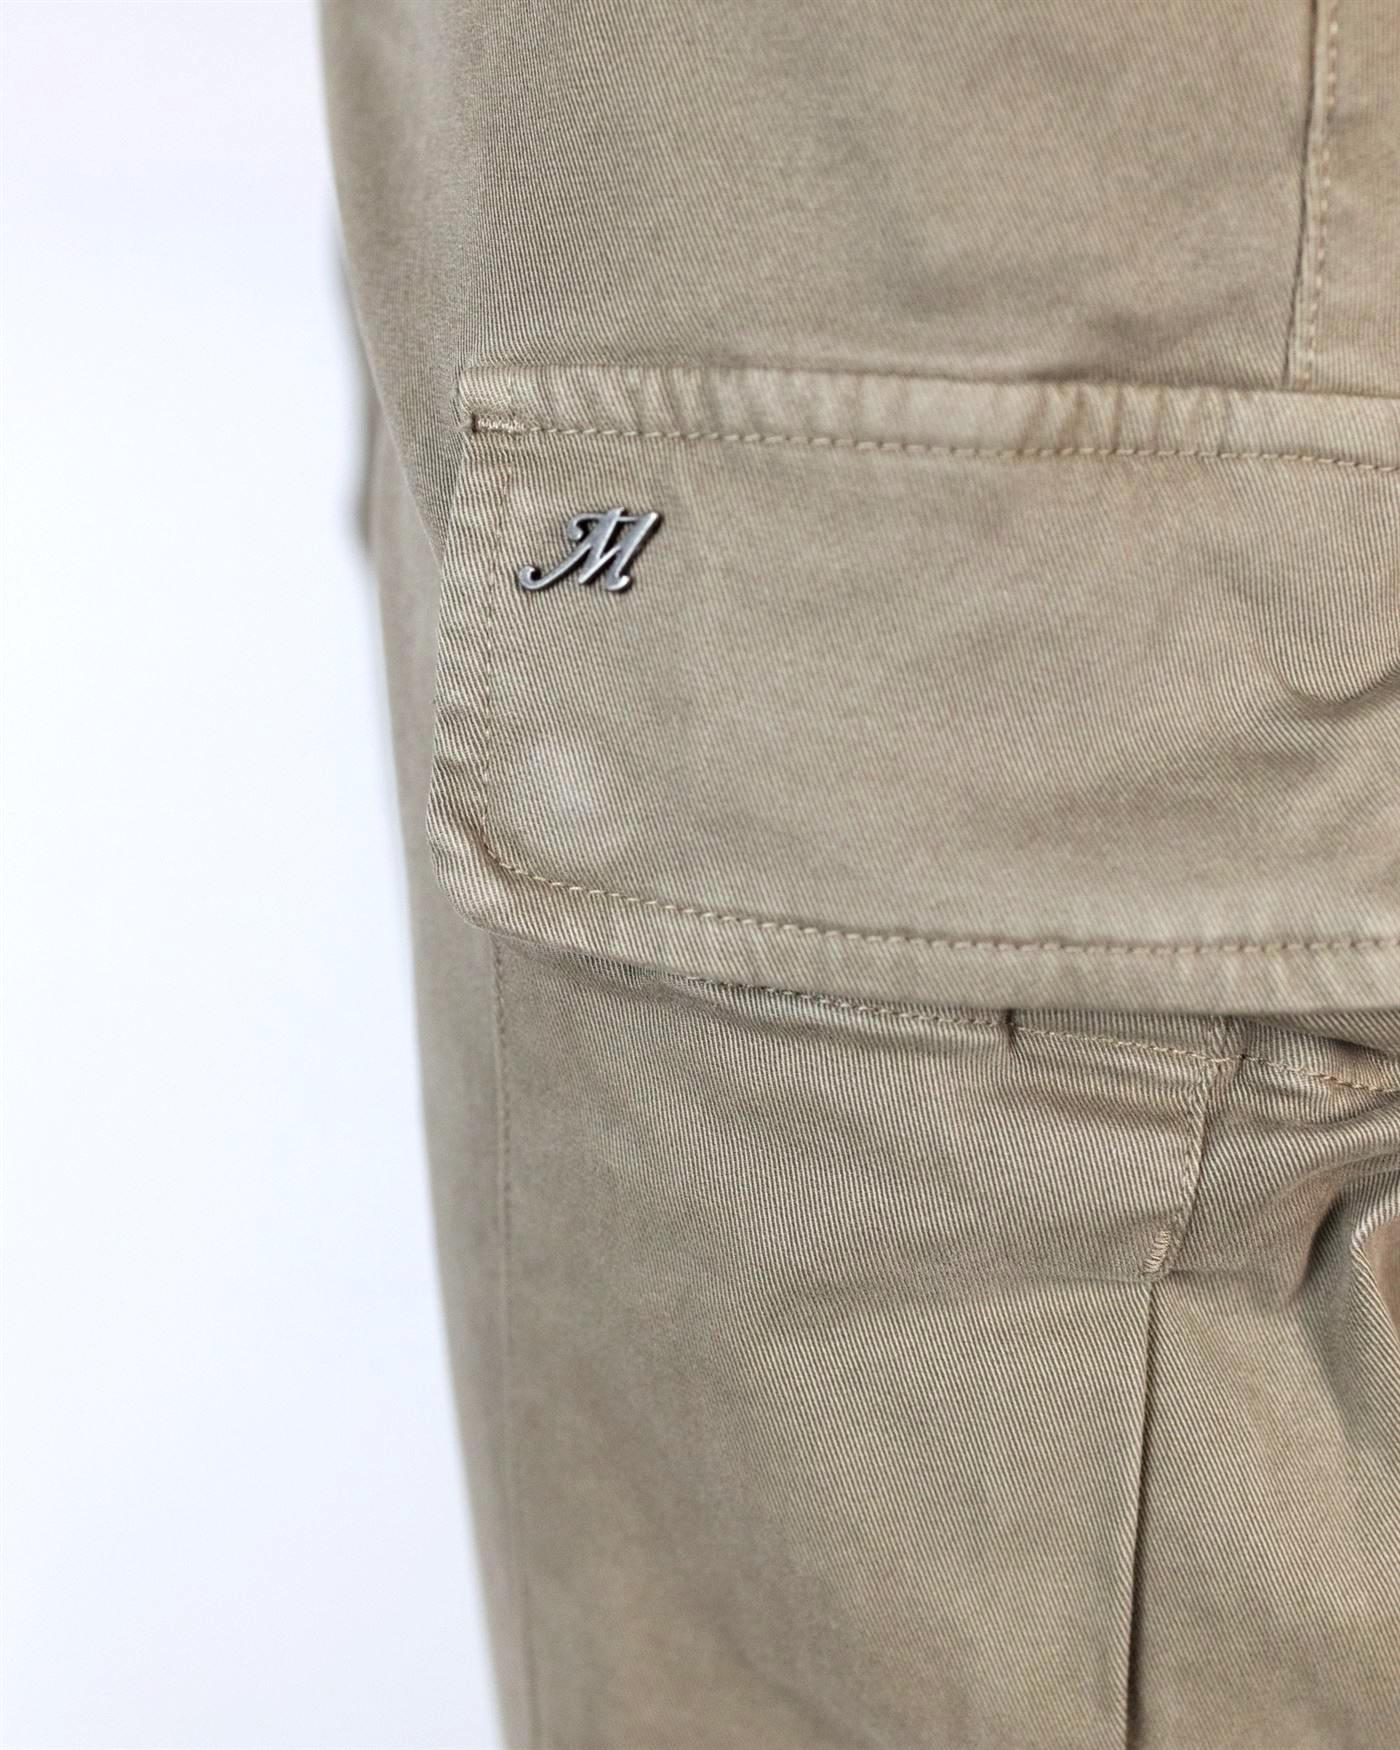 Shop Mason's Camel Chile Cargo Trousers In Mbe130 193cammello